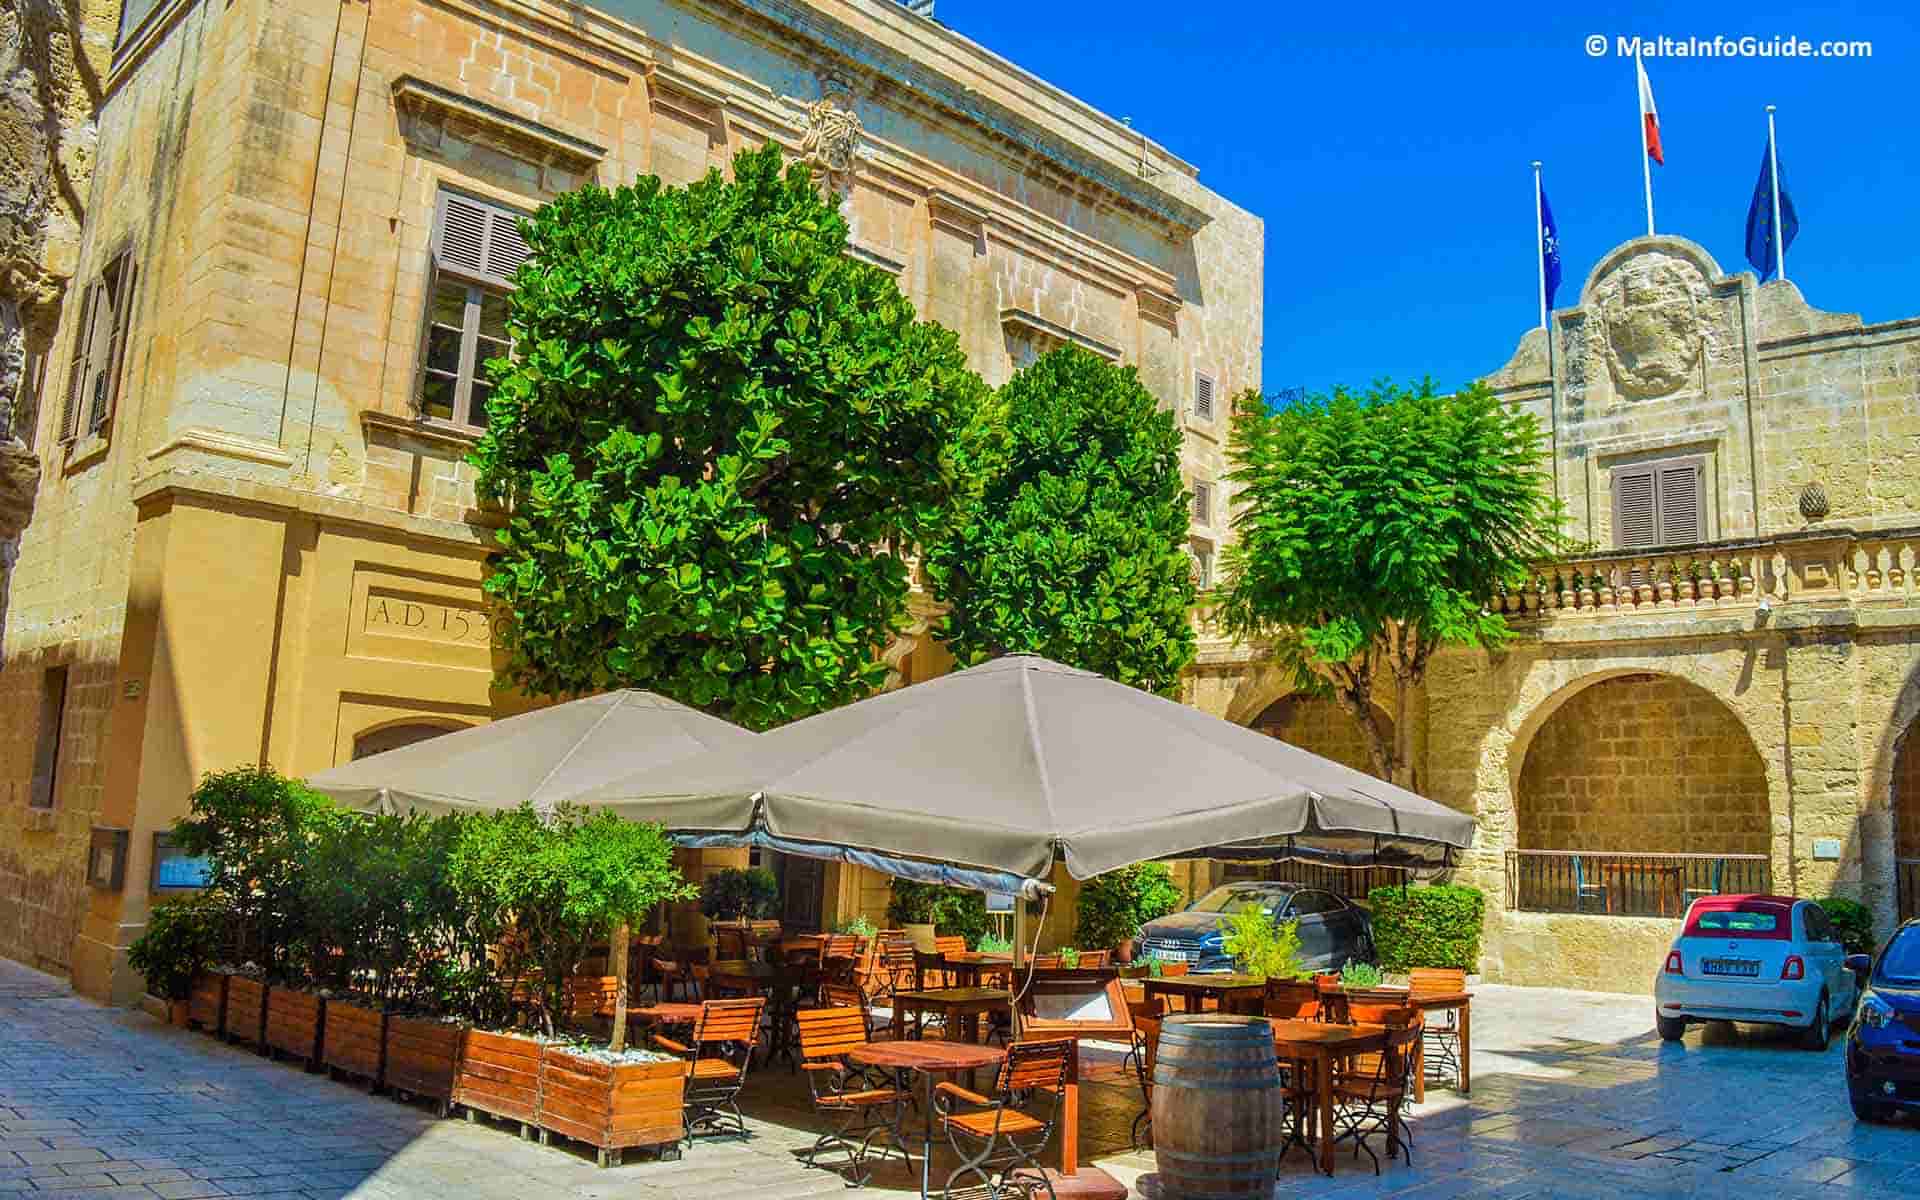 Xara Palace, the one and only hotel in Mdina.